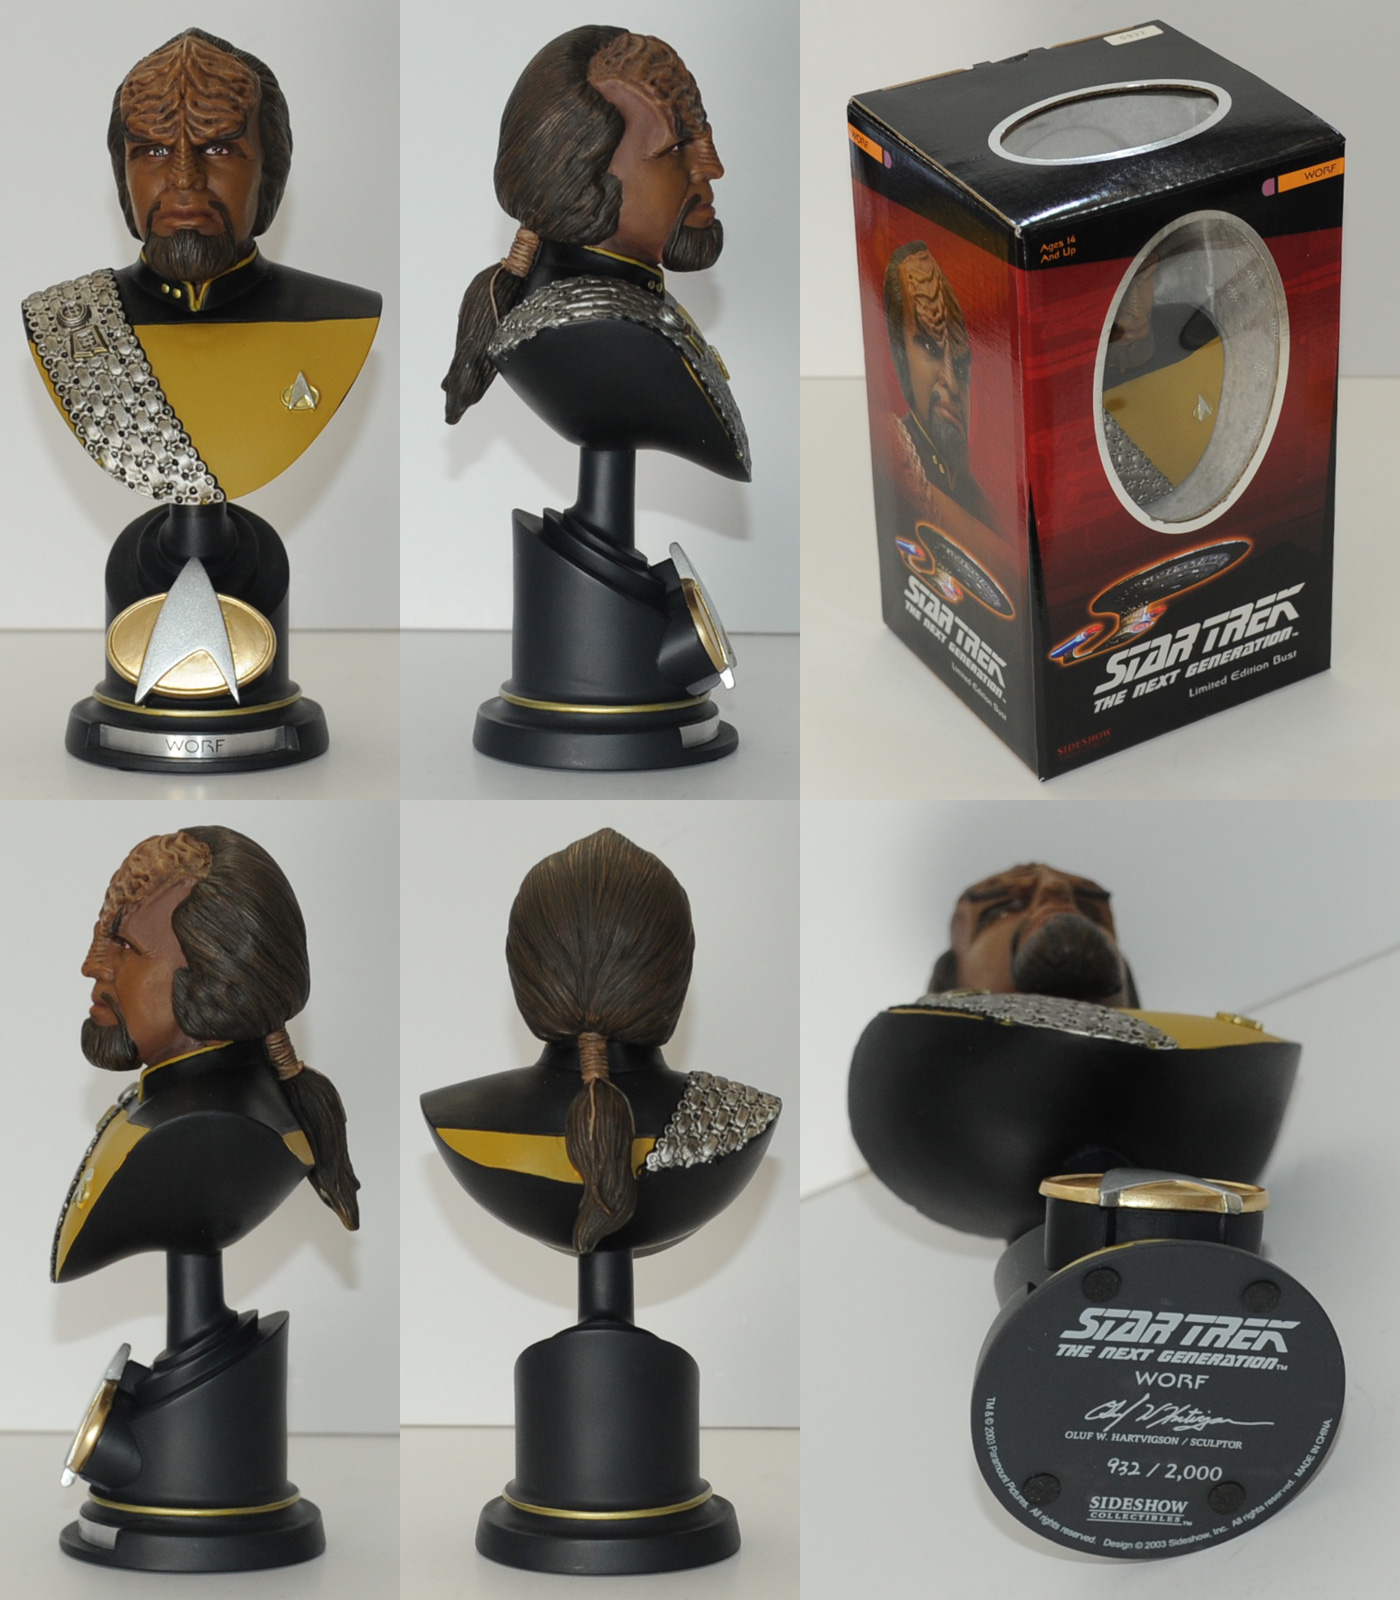 Sideshow Worf Bust